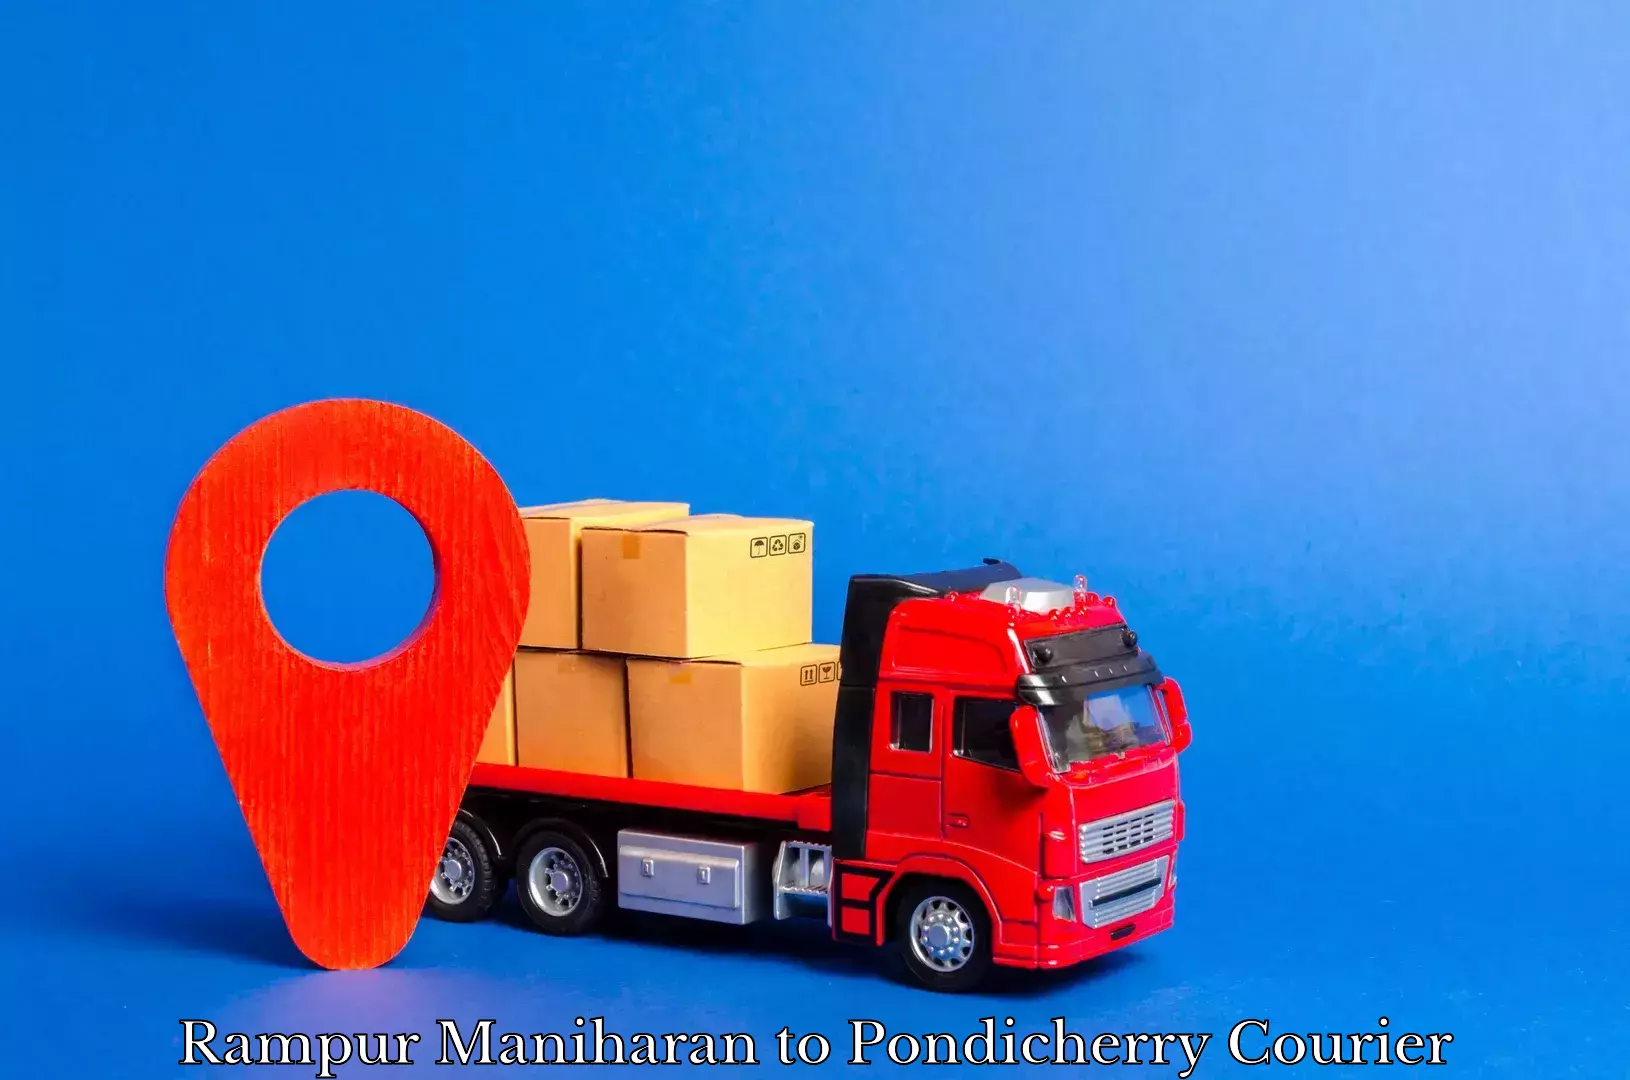 State-of-the-art courier technology Rampur Maniharan to Pondicherry